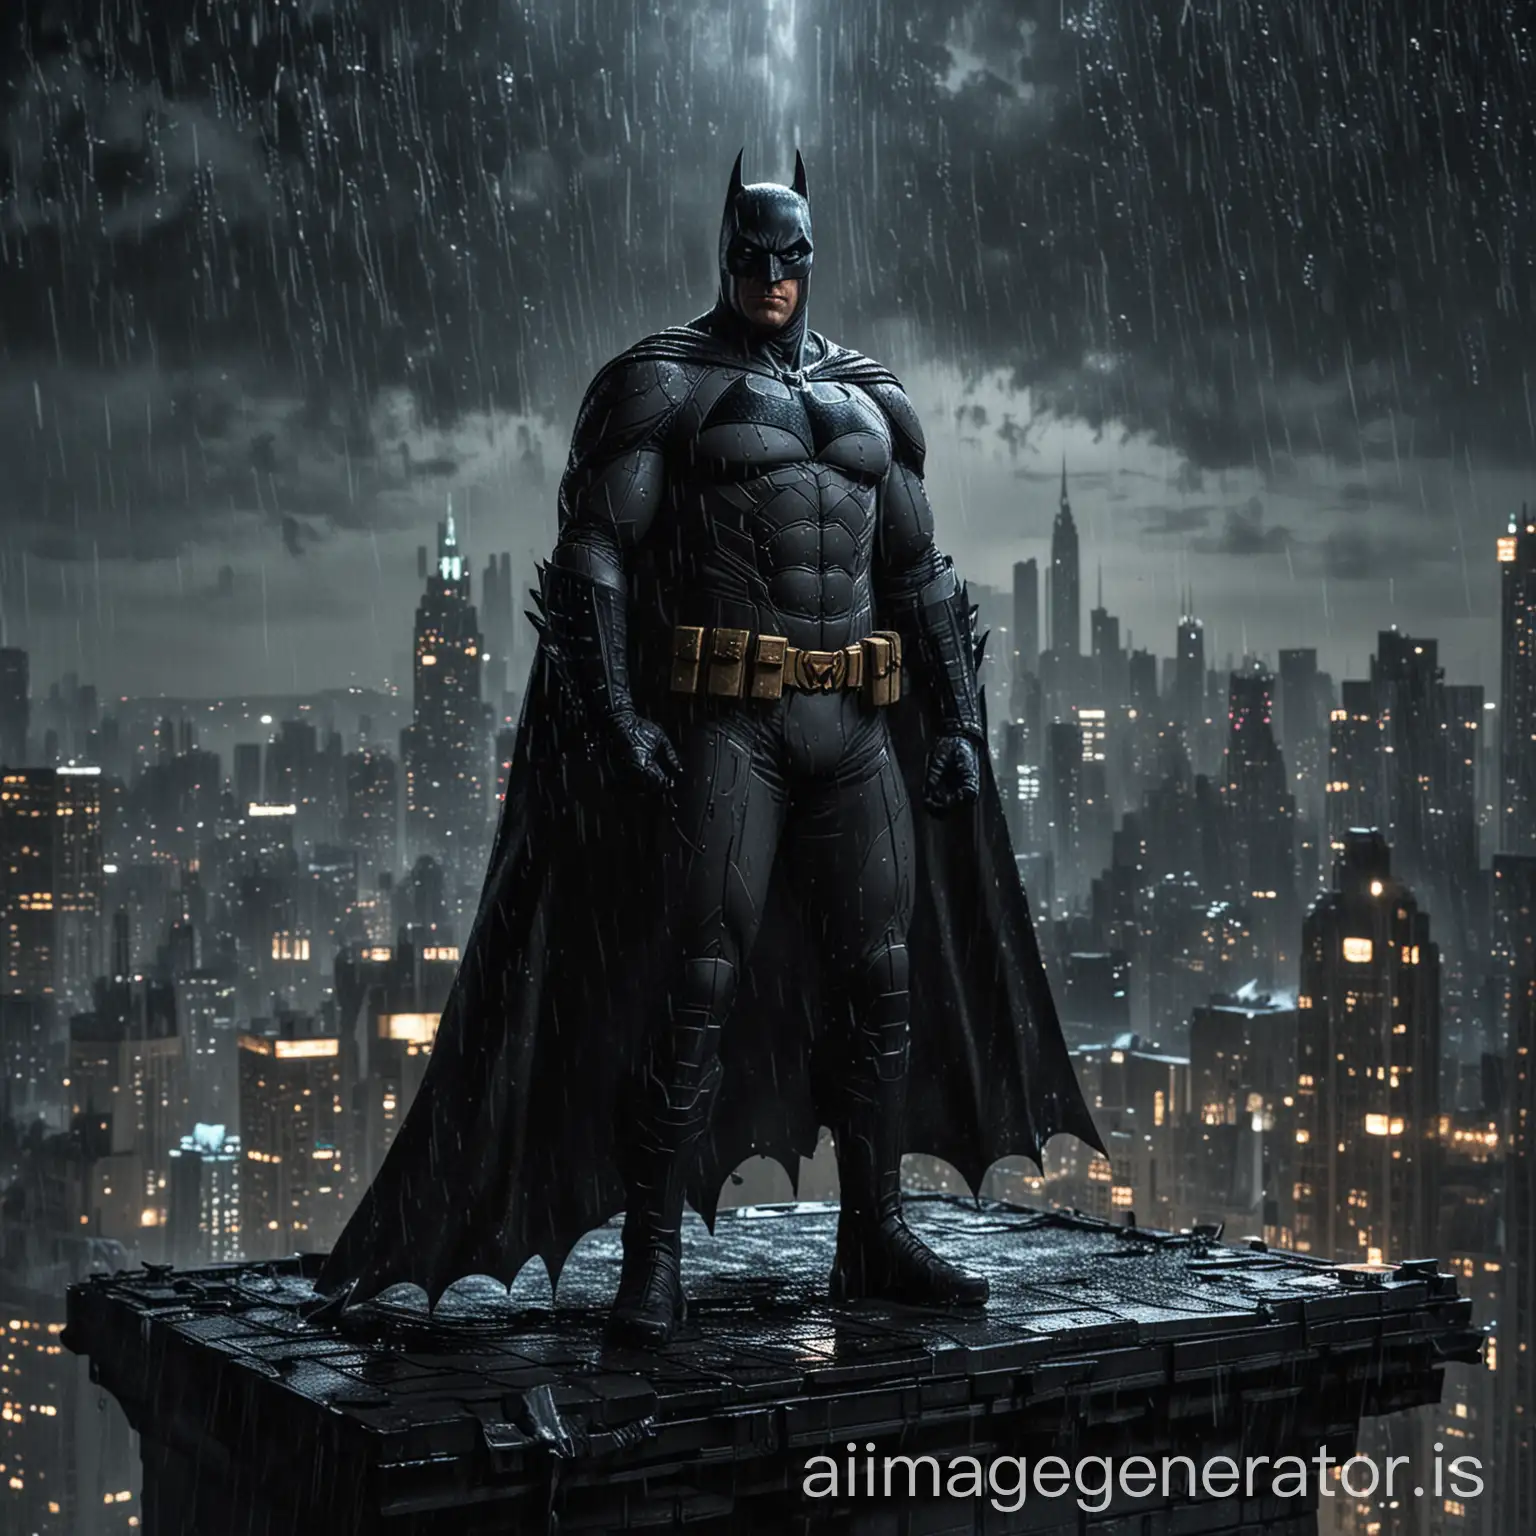 Batman stands on the roof of a skyscraper in Gotham City. It is night. It rains. In the background, spotlights light up the sky.